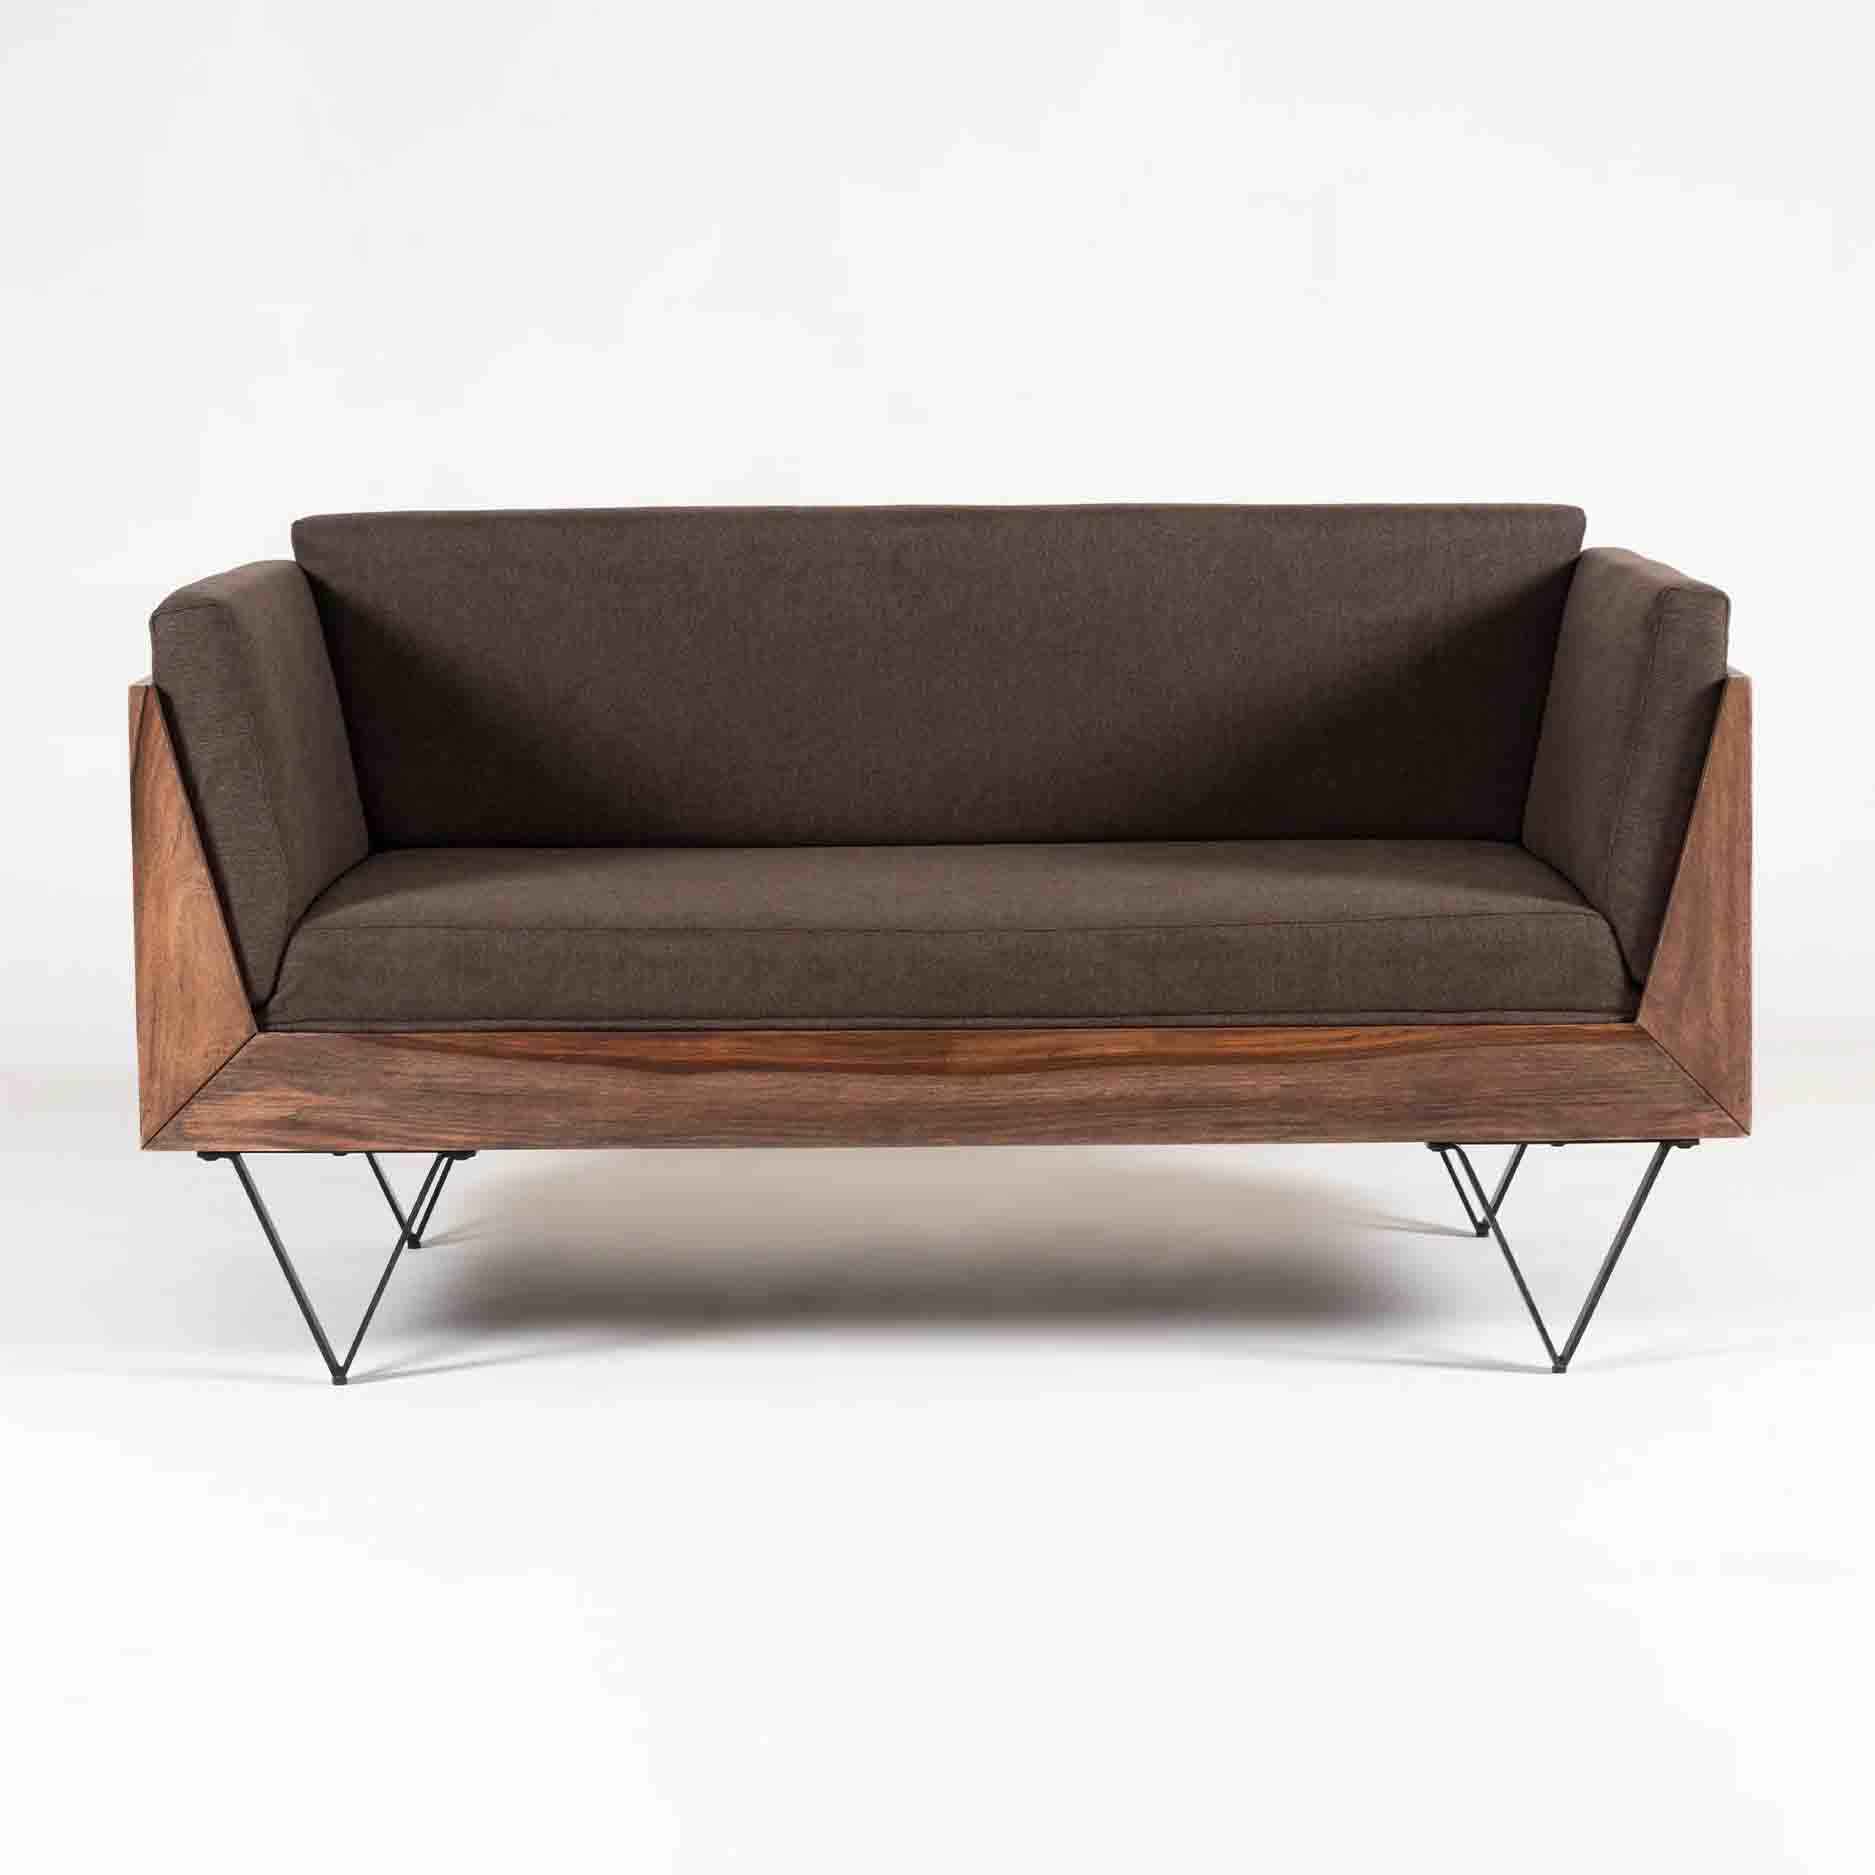 Todd Sectional Chaise Sofa